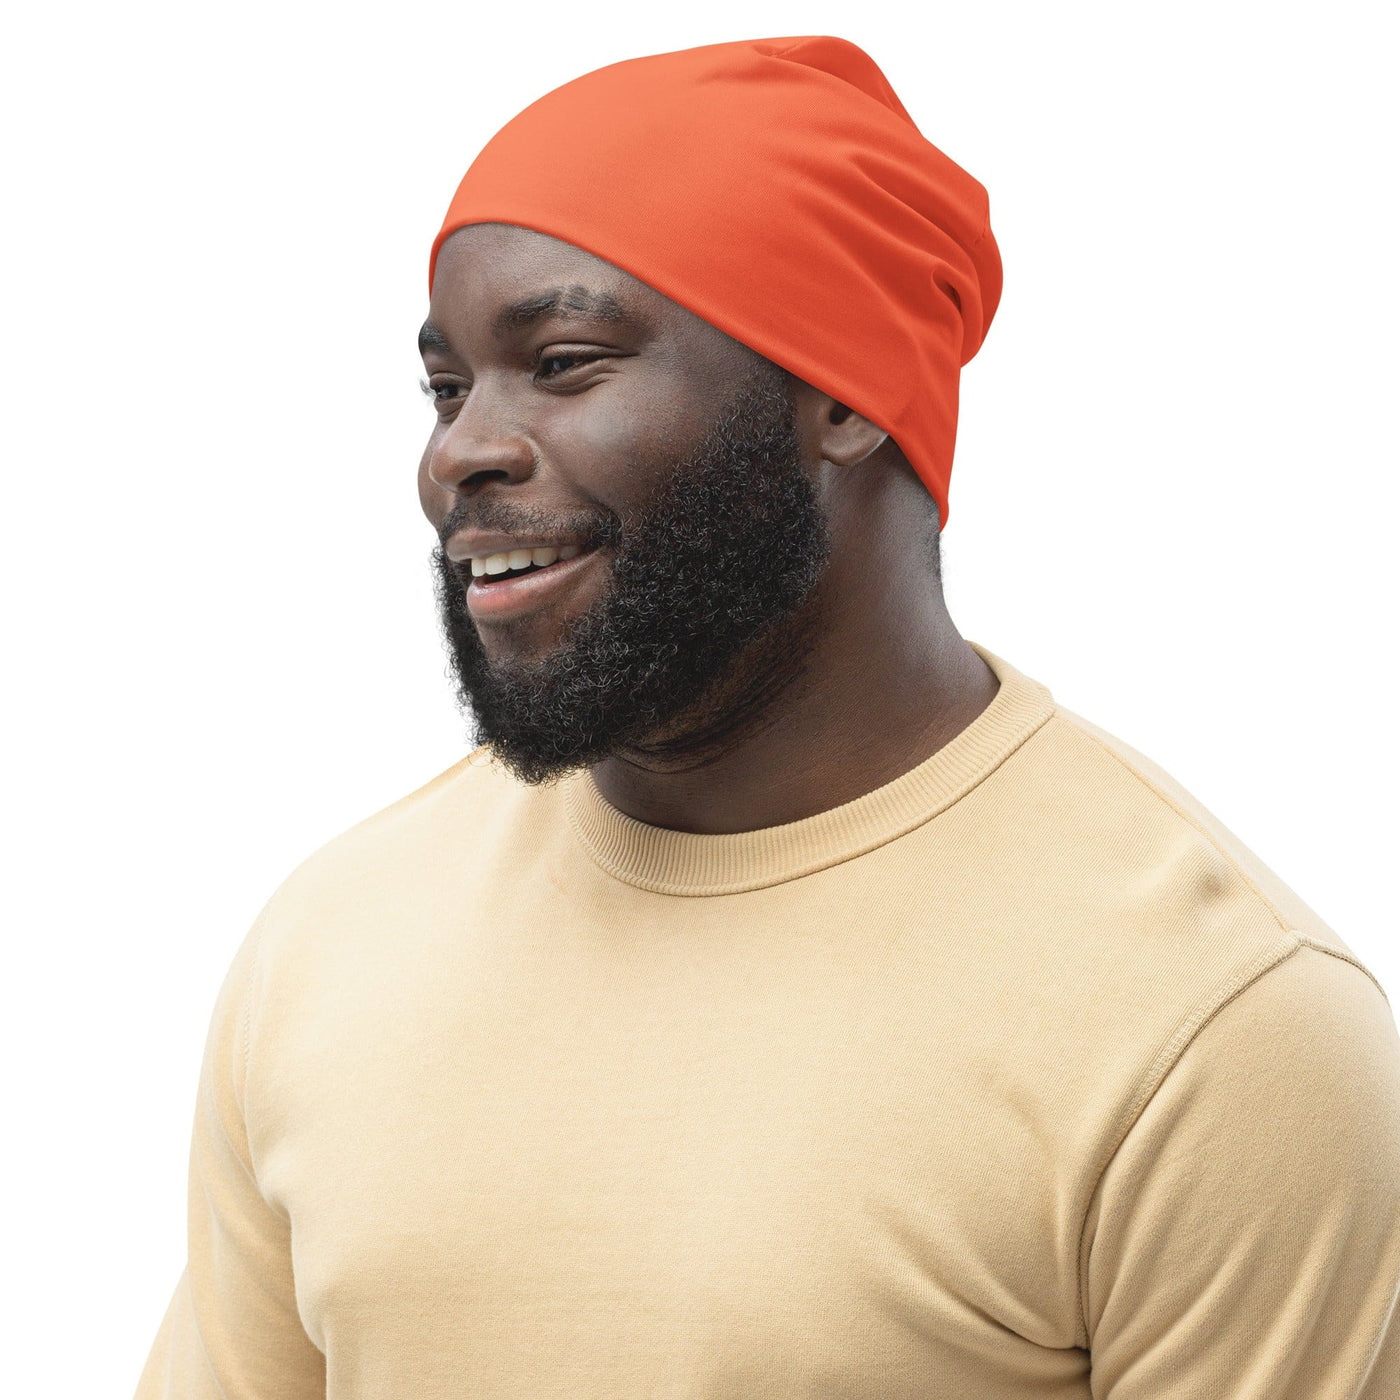 Double-layered Beanie Hat Coral Orange Red 2